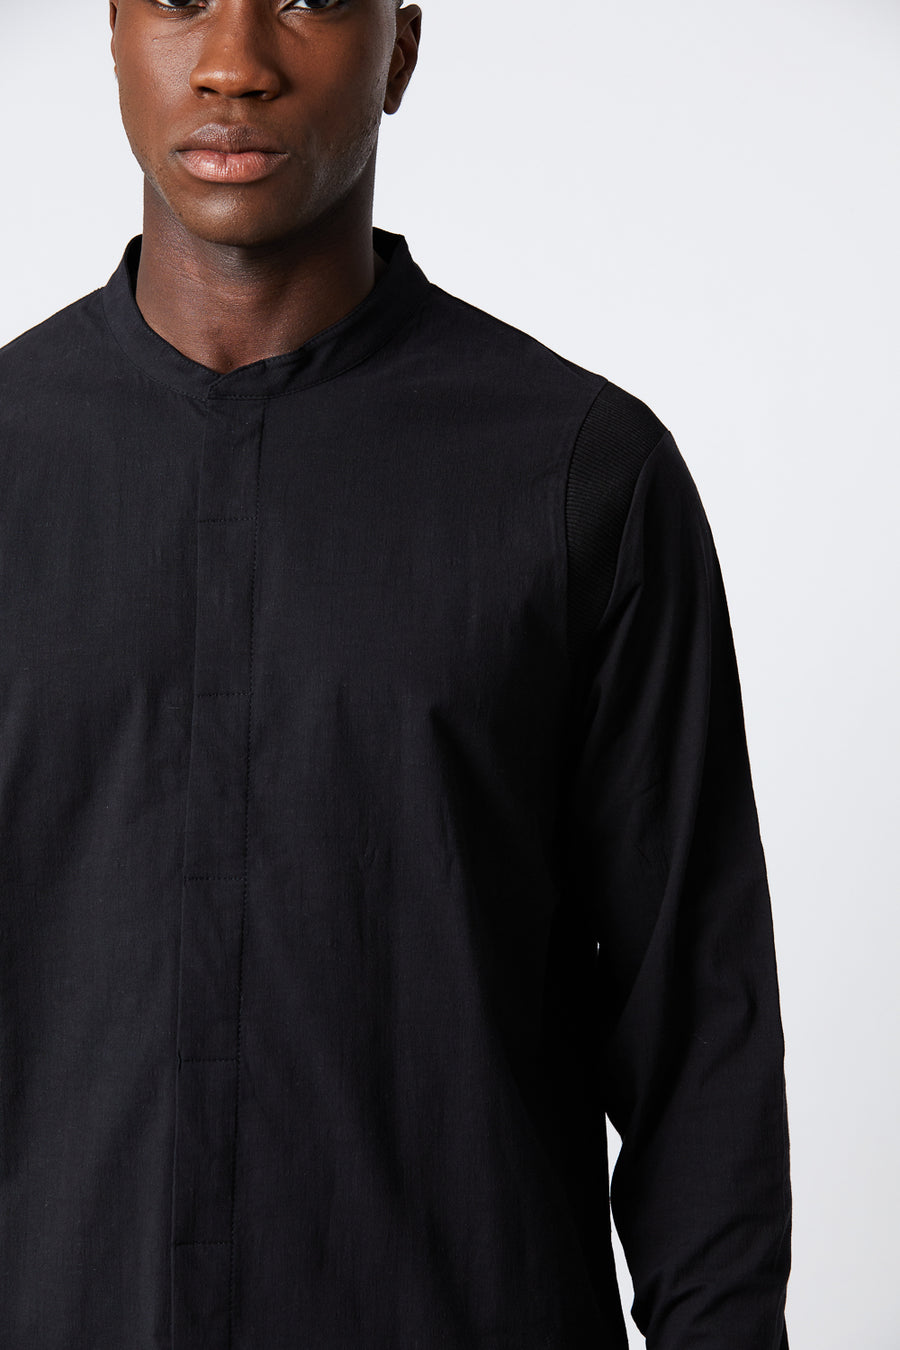 Buy the Thom Krom M H 130 Shirt in Black at Intro. Spend £50 for free UK delivery. Official stockists. We ship worldwide.